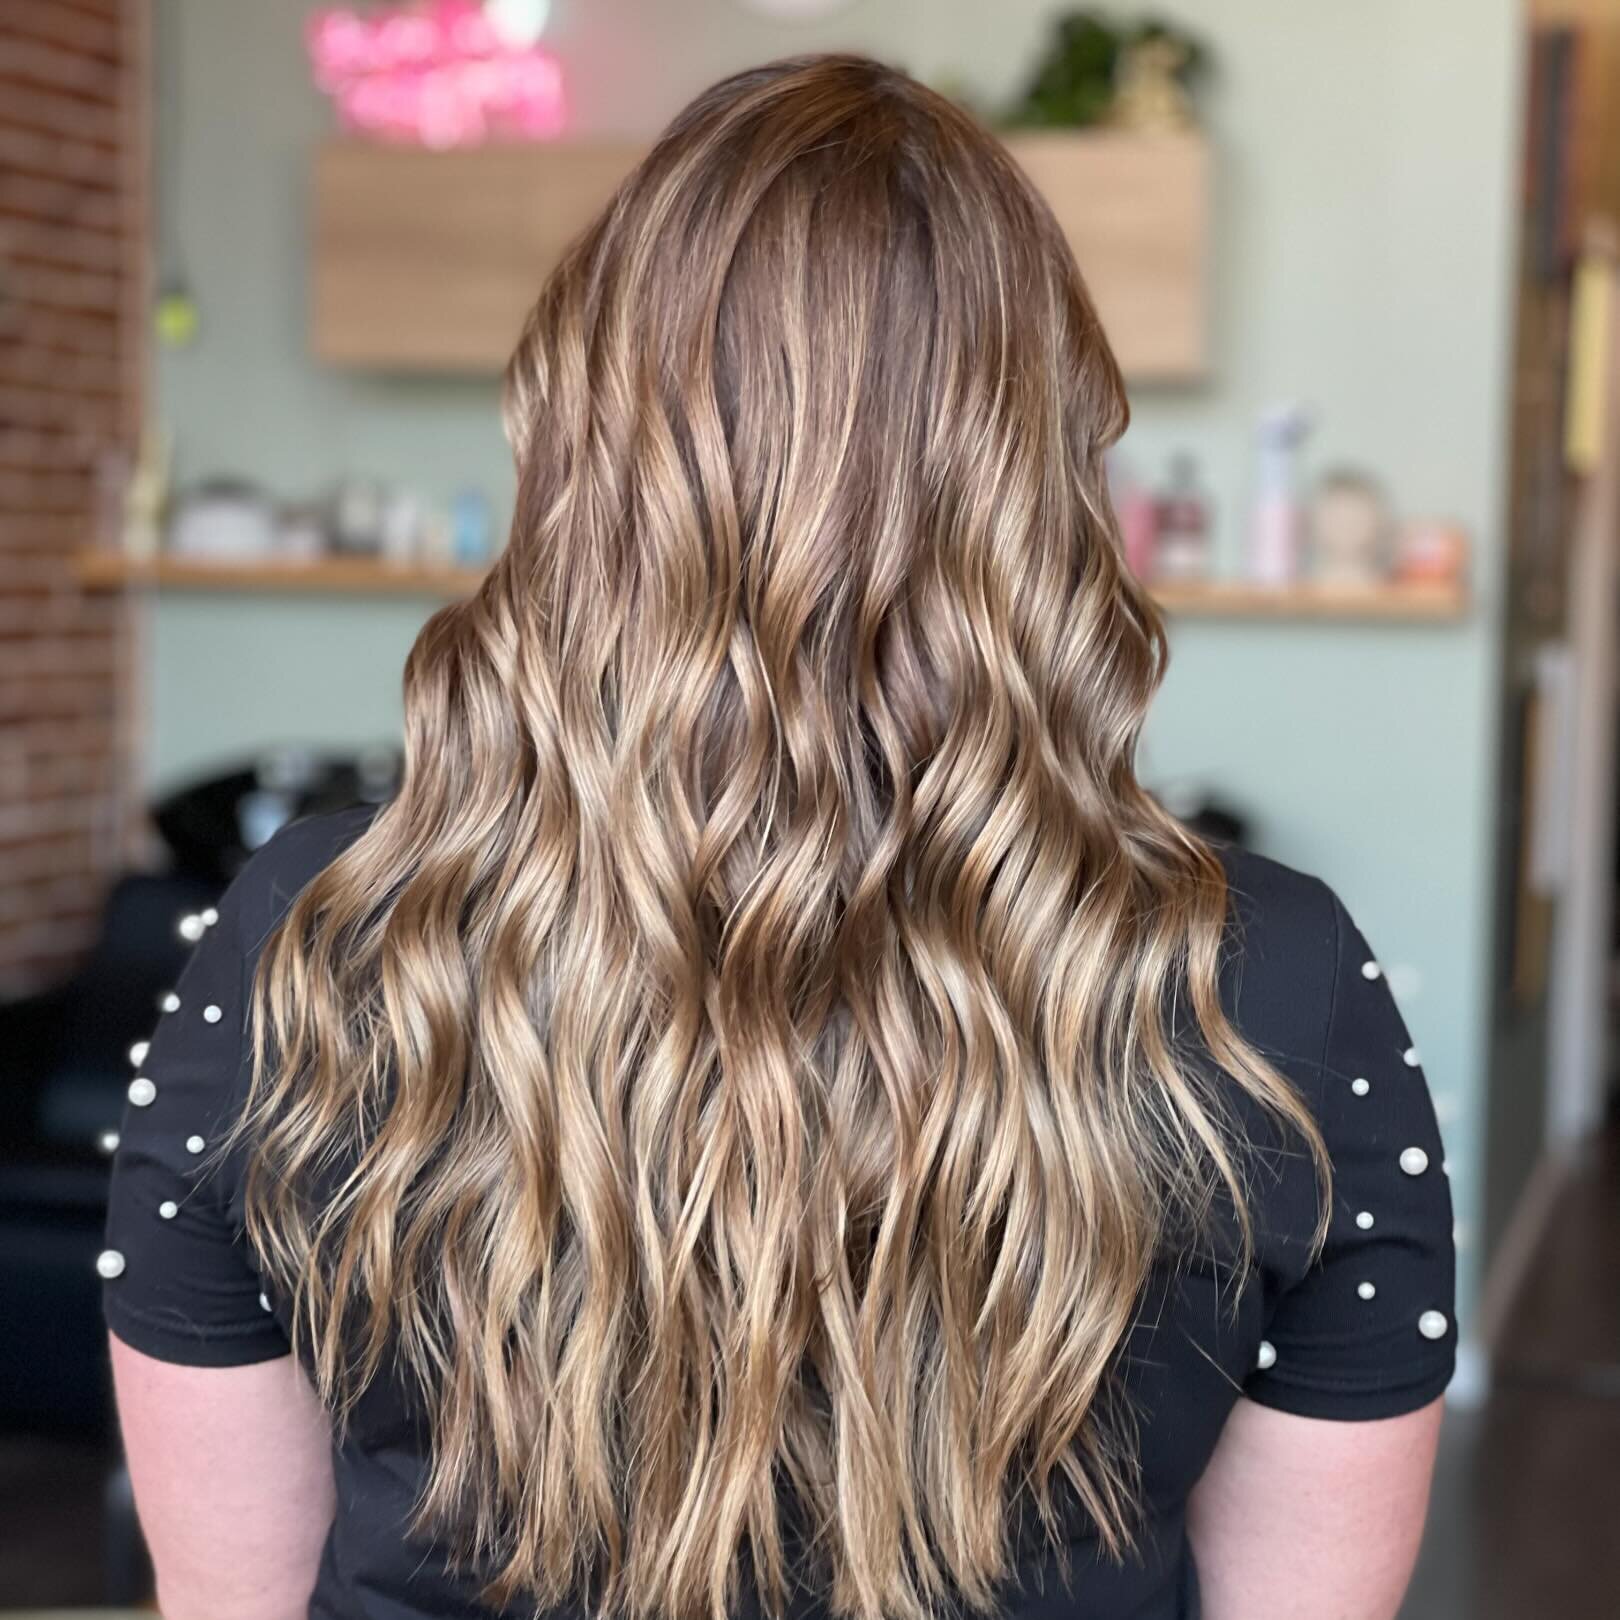 Scheduling a gloss/toner can help you stretch a little more time between your color appointments! We removed brassiness and added shine back into this gorgeous clients hair!